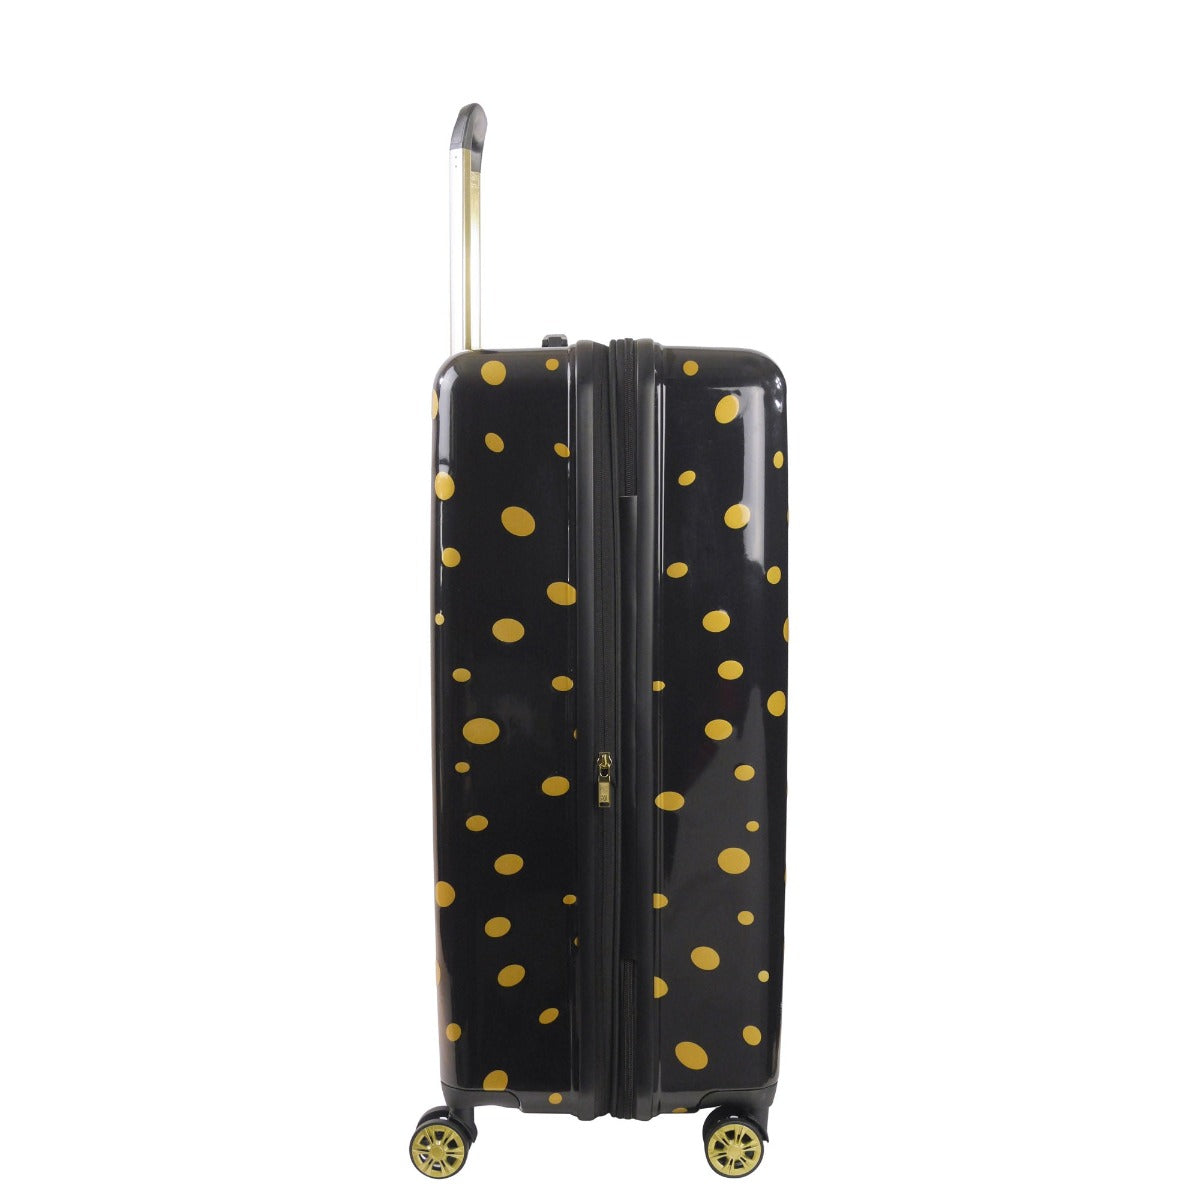 Ful Impulse Mixed Dots hardside spinner 31 inch checked luggage black gold suitcase